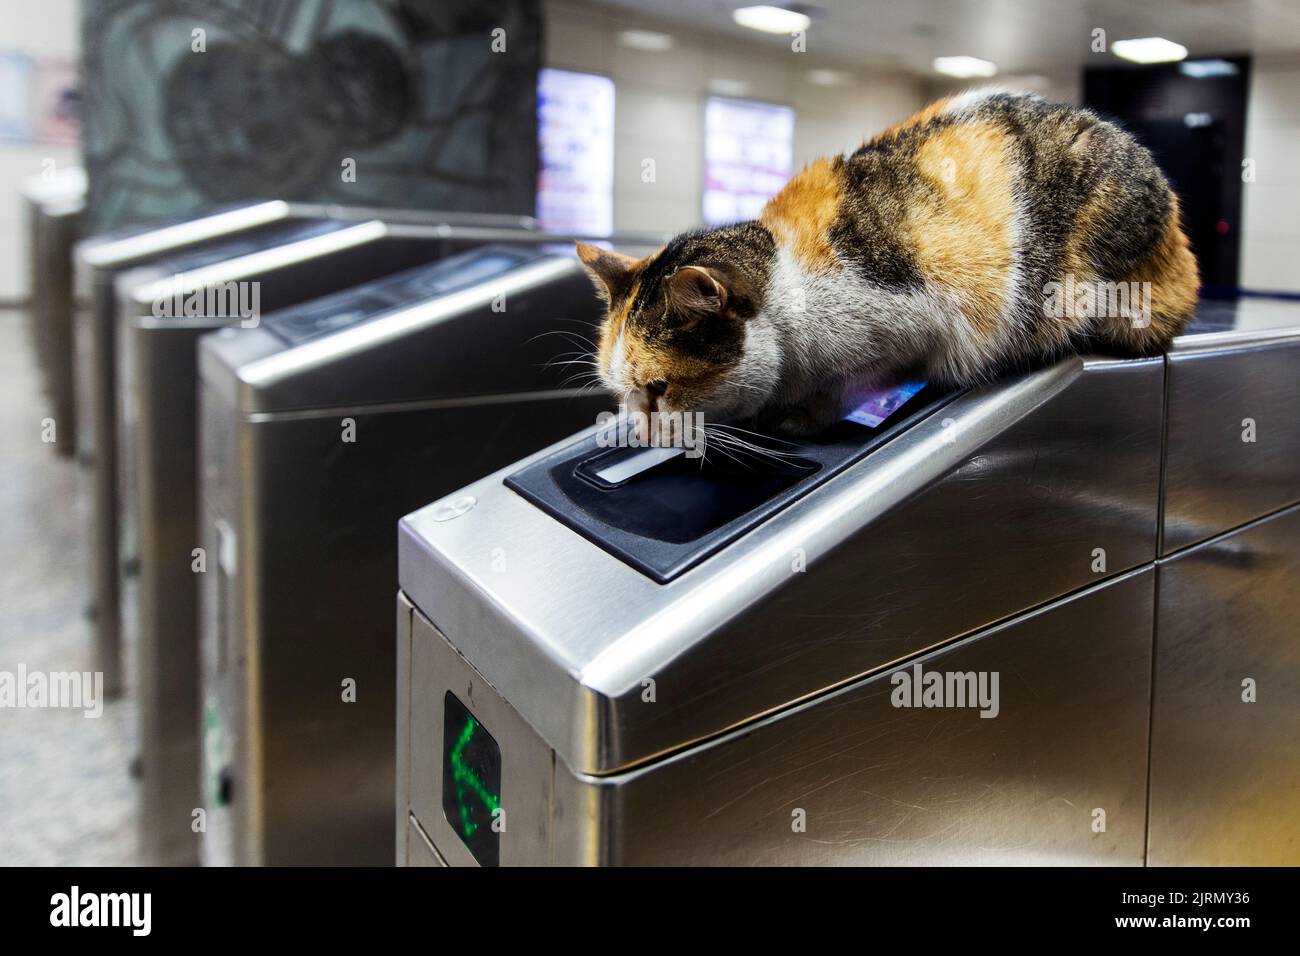 Worried calico cat crouched on electronic turnstile in a subway station Stock Photo